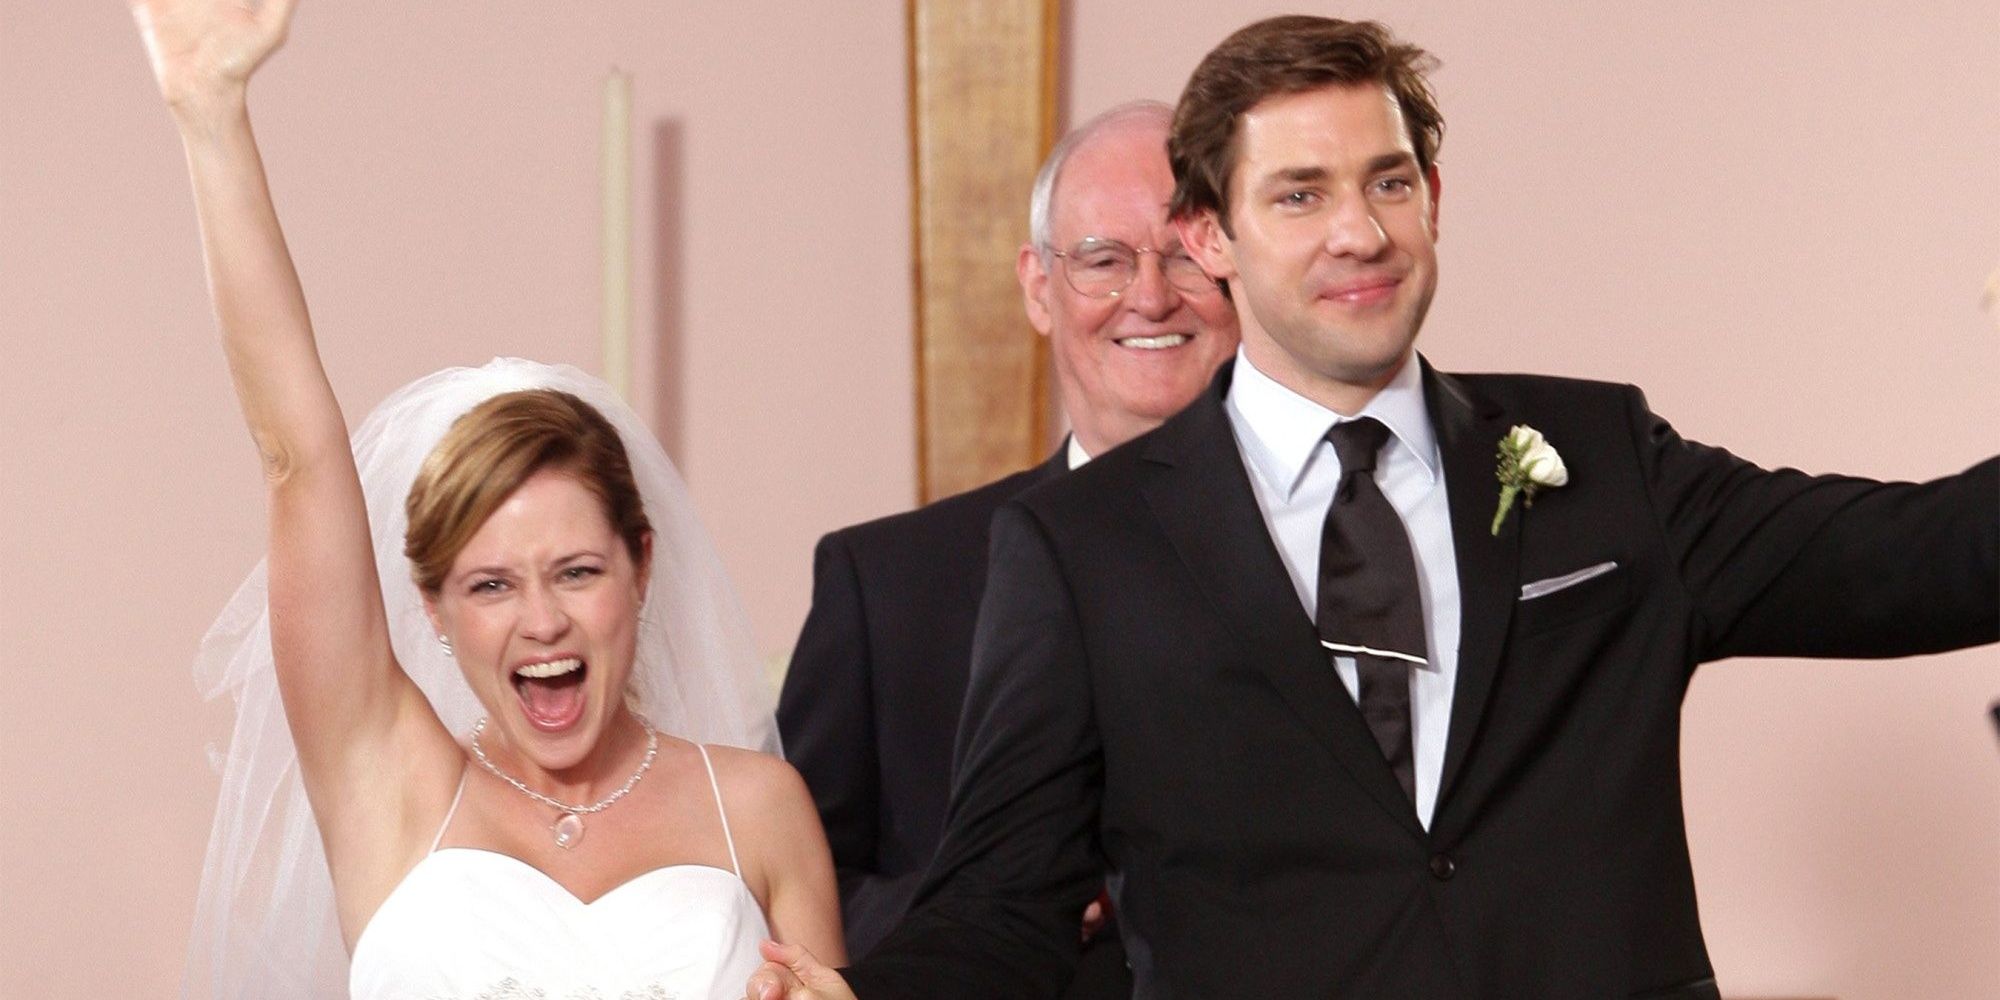 Jim and Pam get married in The Office